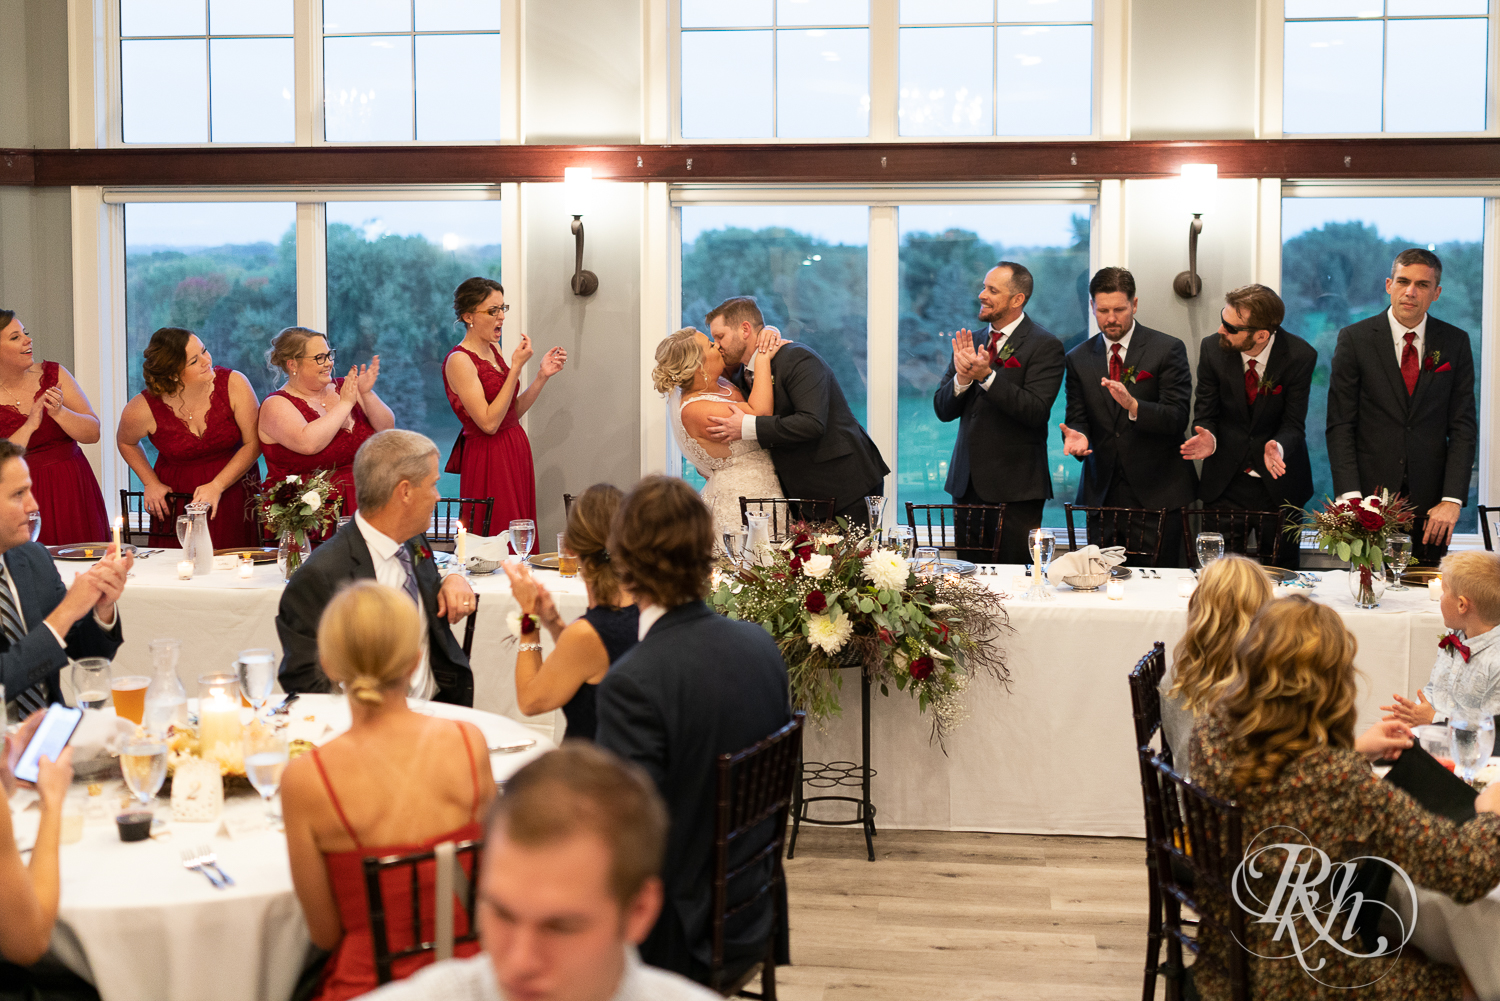 Bride and groom kiss at head table during reception at Hastings Golf Club in Hastings, Minnesota.